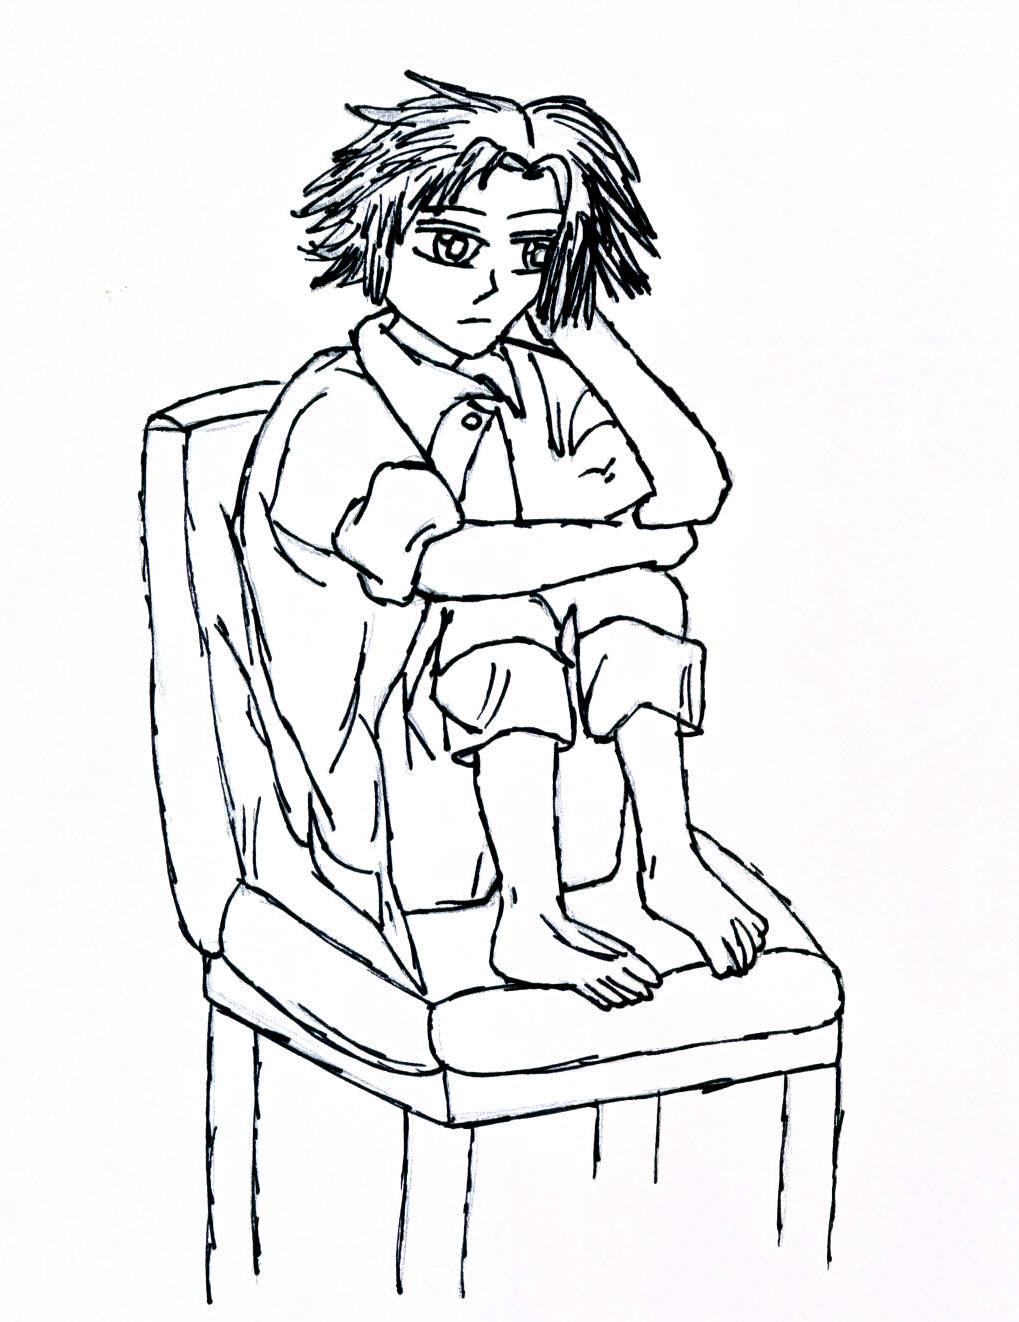 Tidus in a chair. by yamiskoi